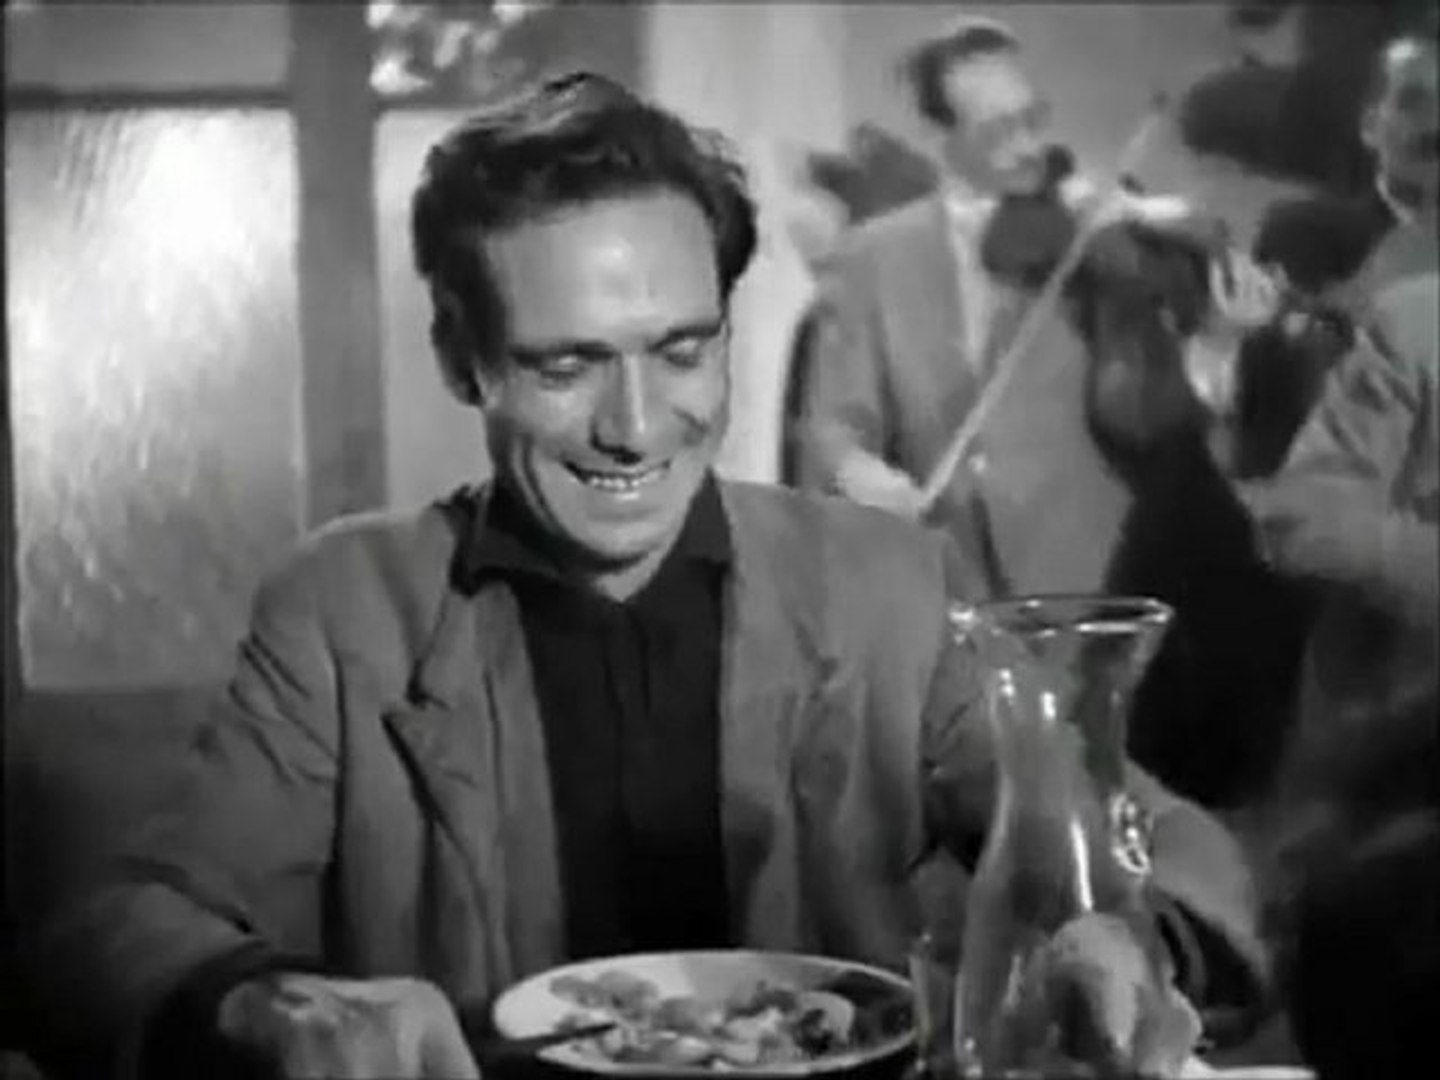 Bicycle Thieves (Ladri di biciclette) - Dining Scene - Dailymotion Video